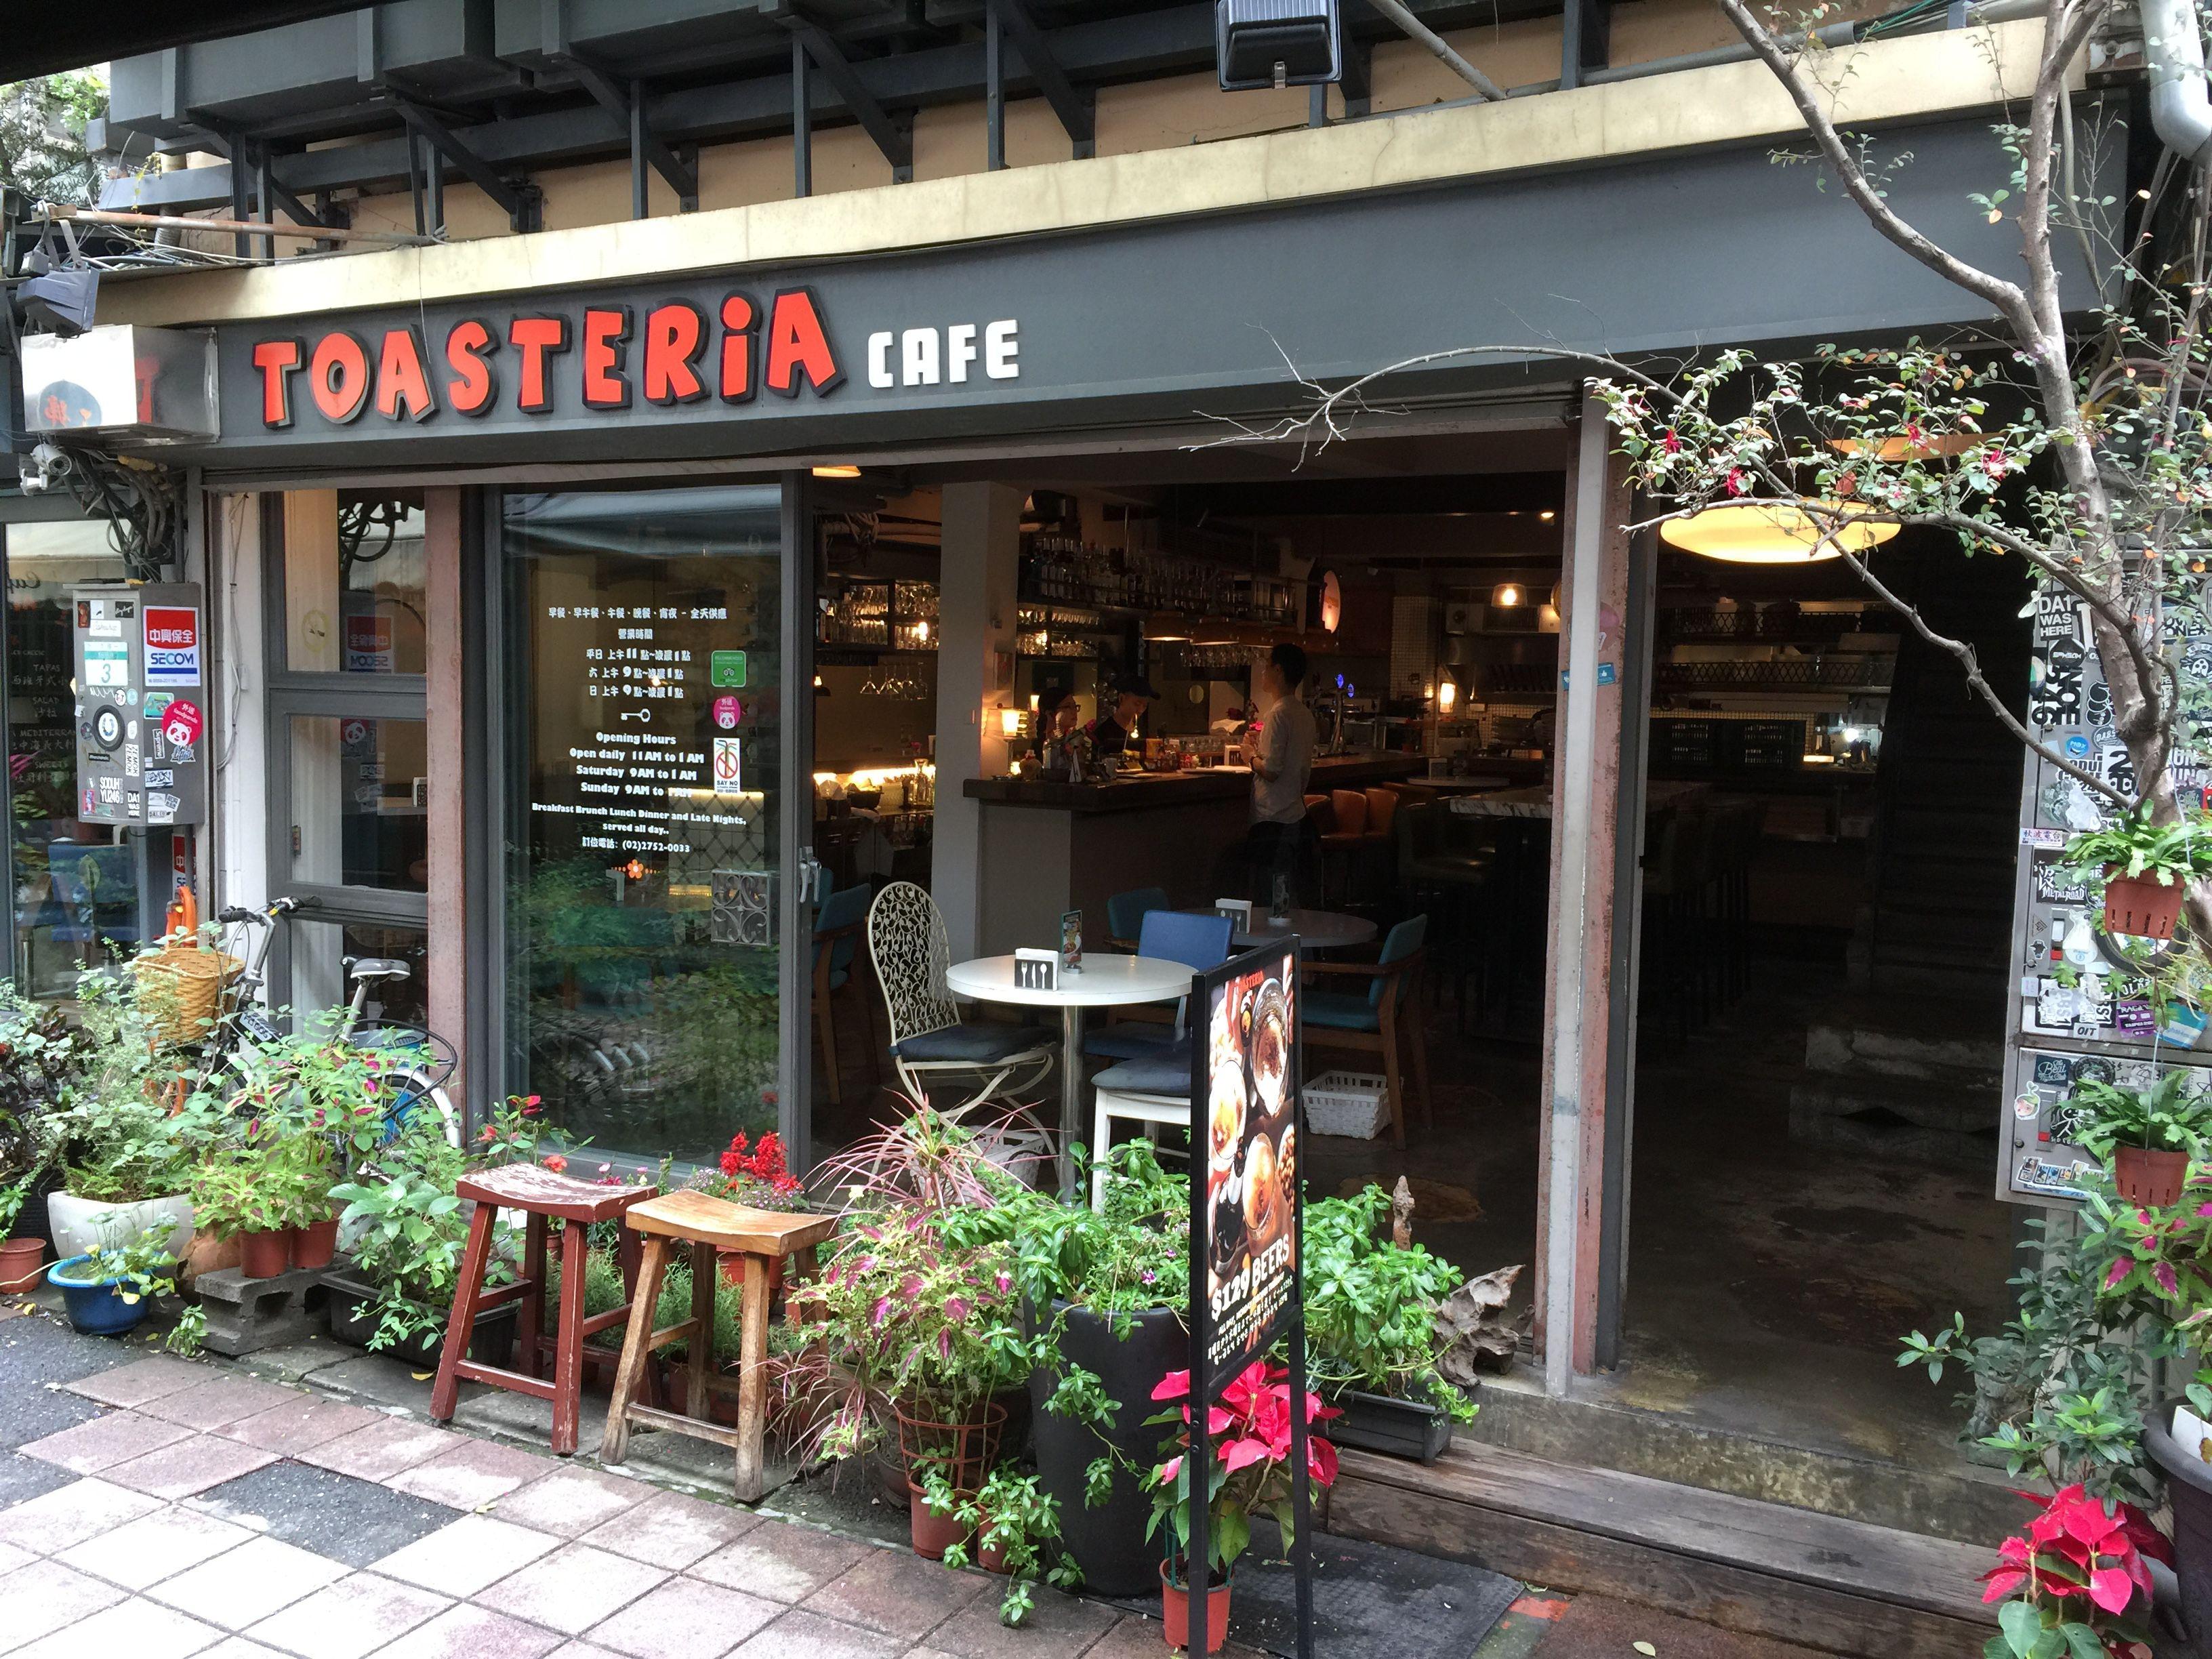 The World's Best Grilled Cheese at Toasteria Cafe